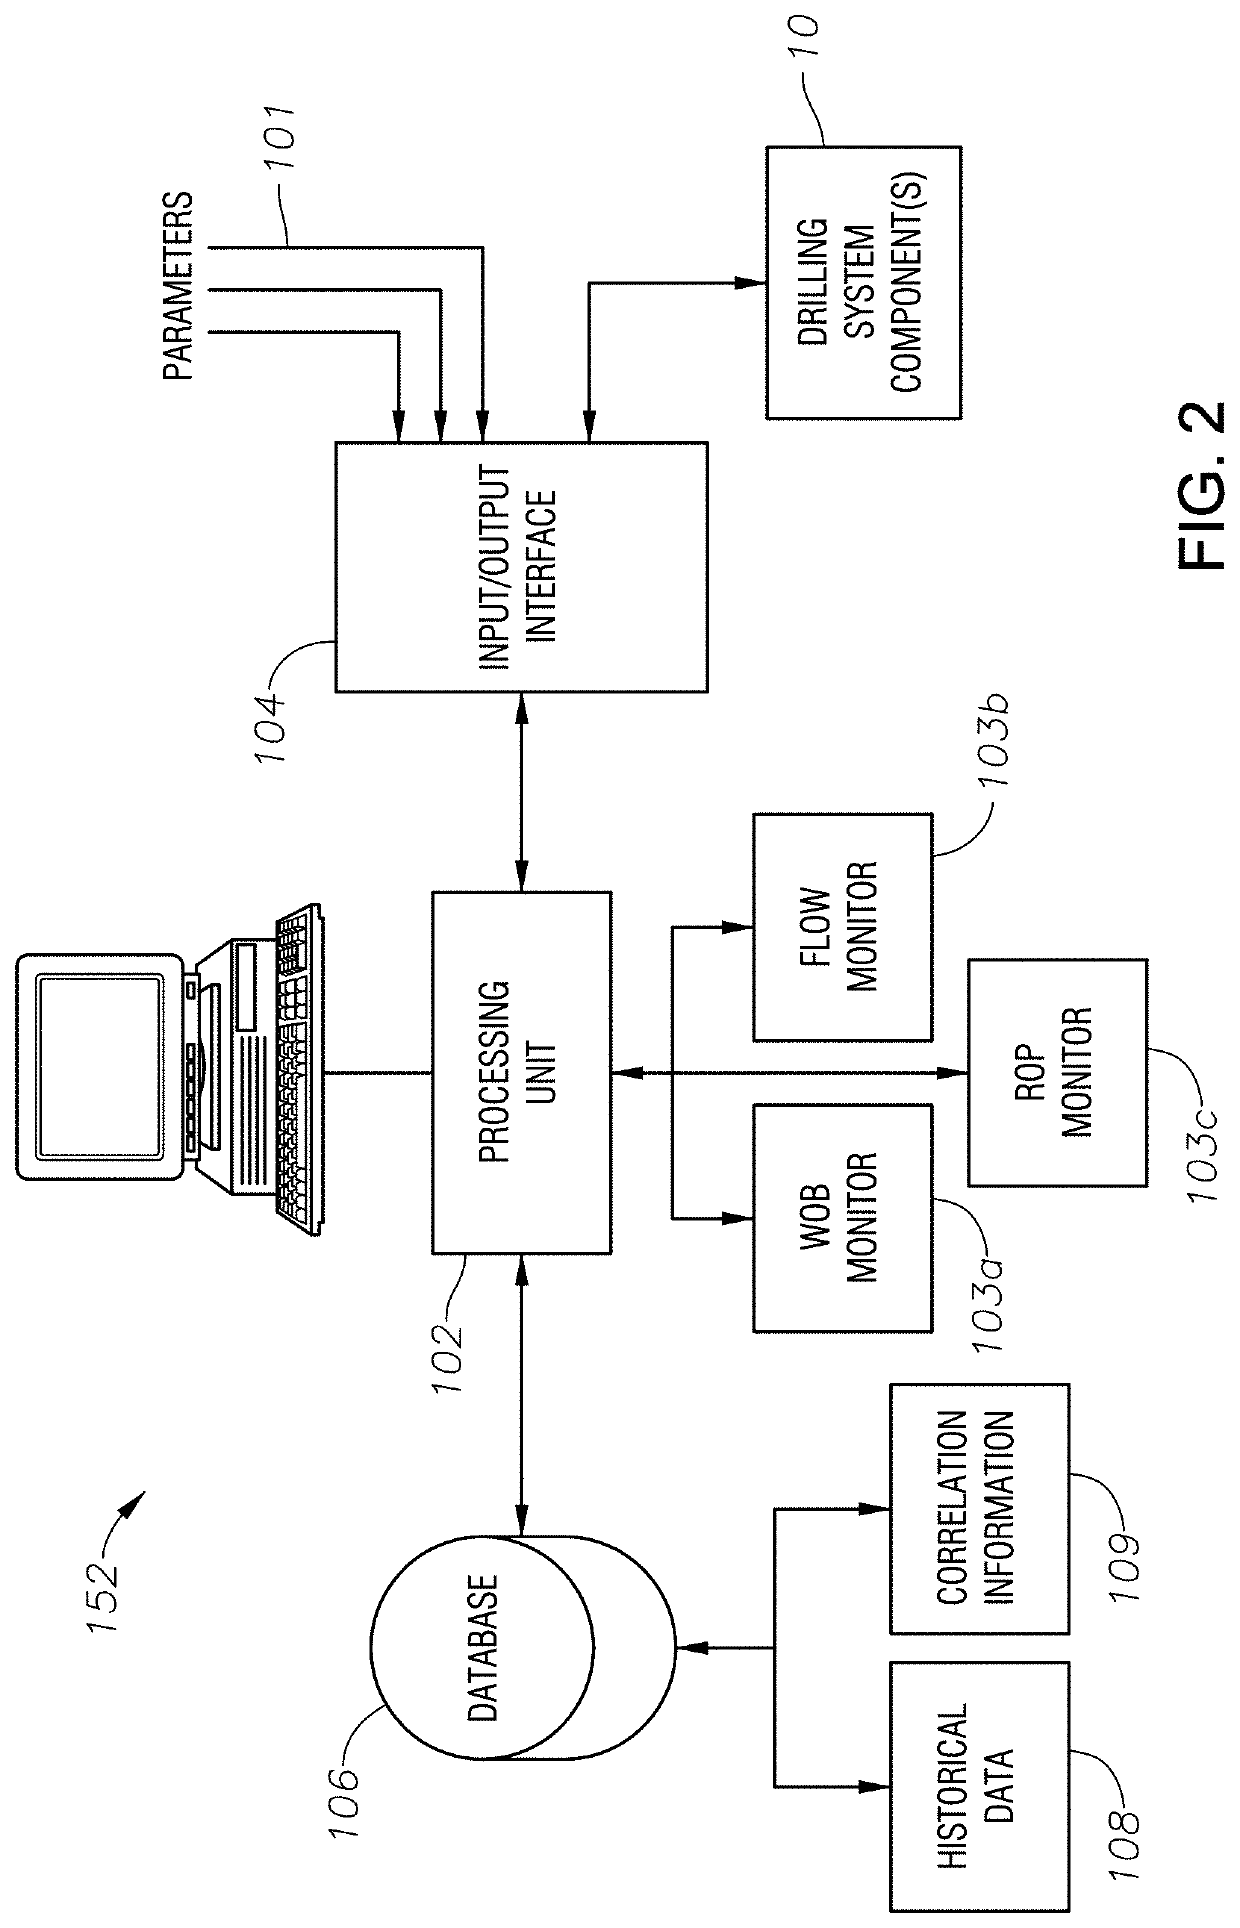 Systems and methods for optimizing rate of penetration in drilling operations